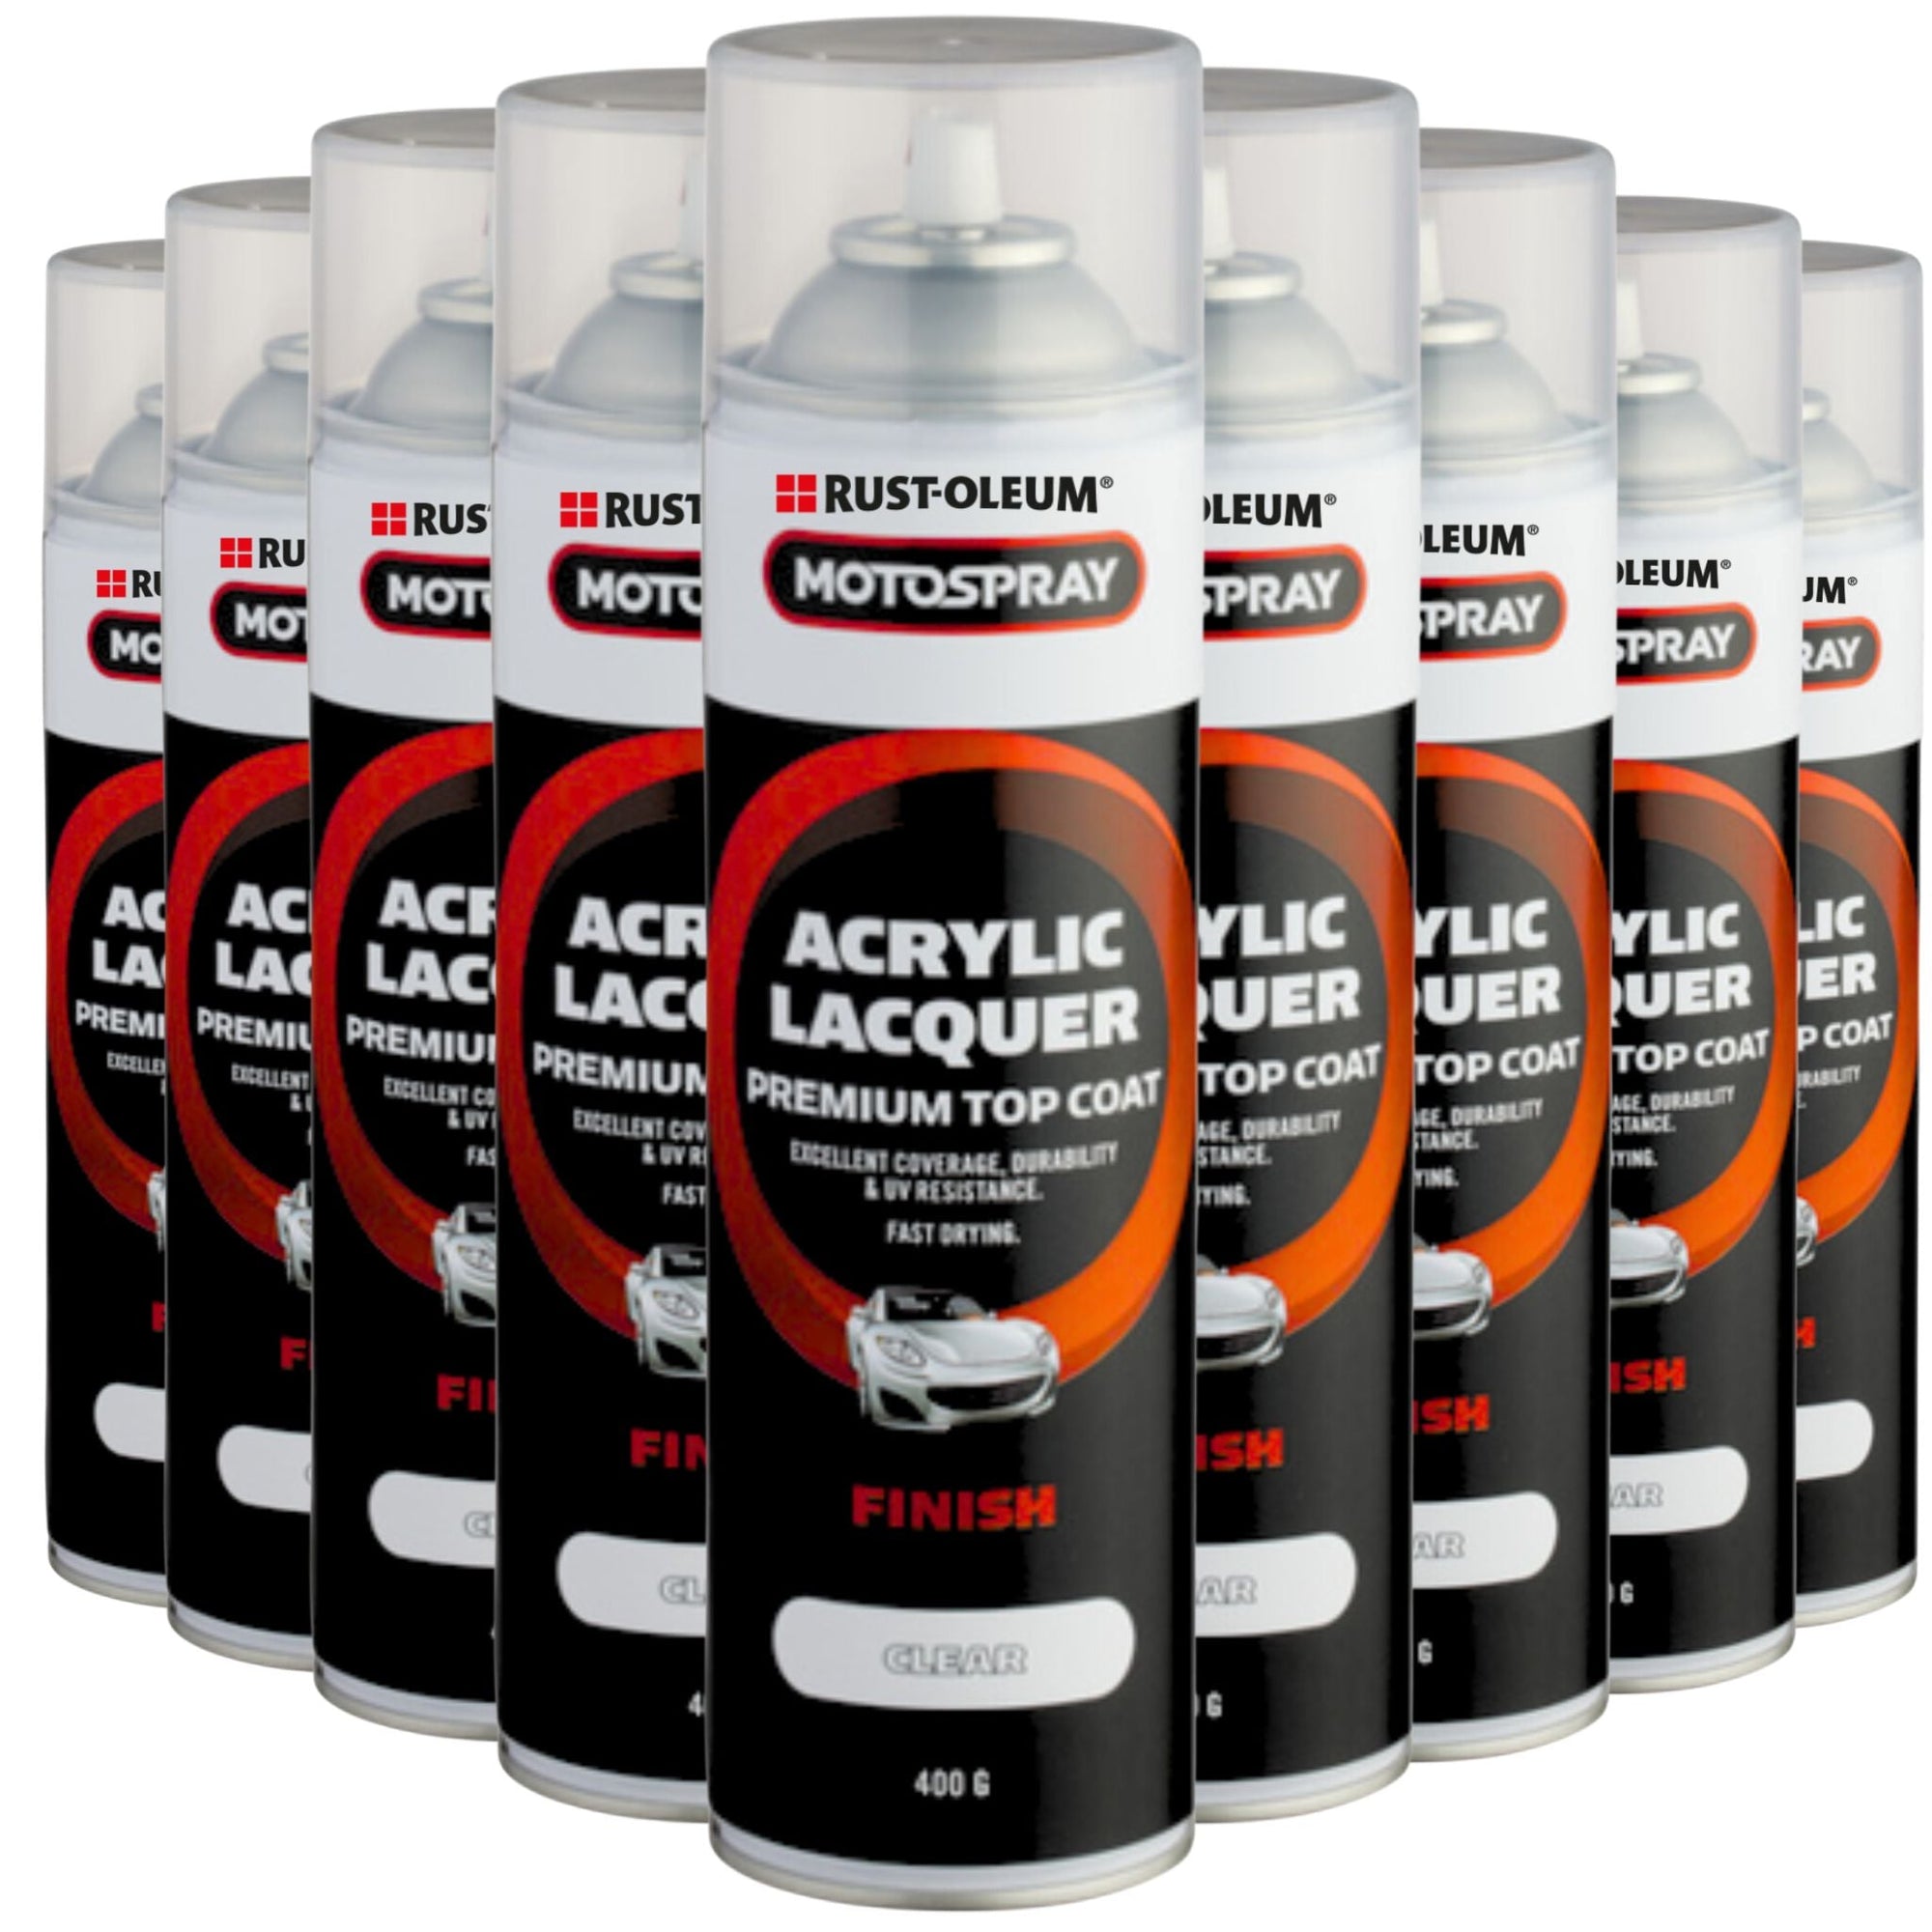 RUSTOLEUM TCC400 Motospray Premium Top Coat Clear Acrylic Lacquer 400g | GLOSS CLEAR (12 CANS) - South East Clearance Centre